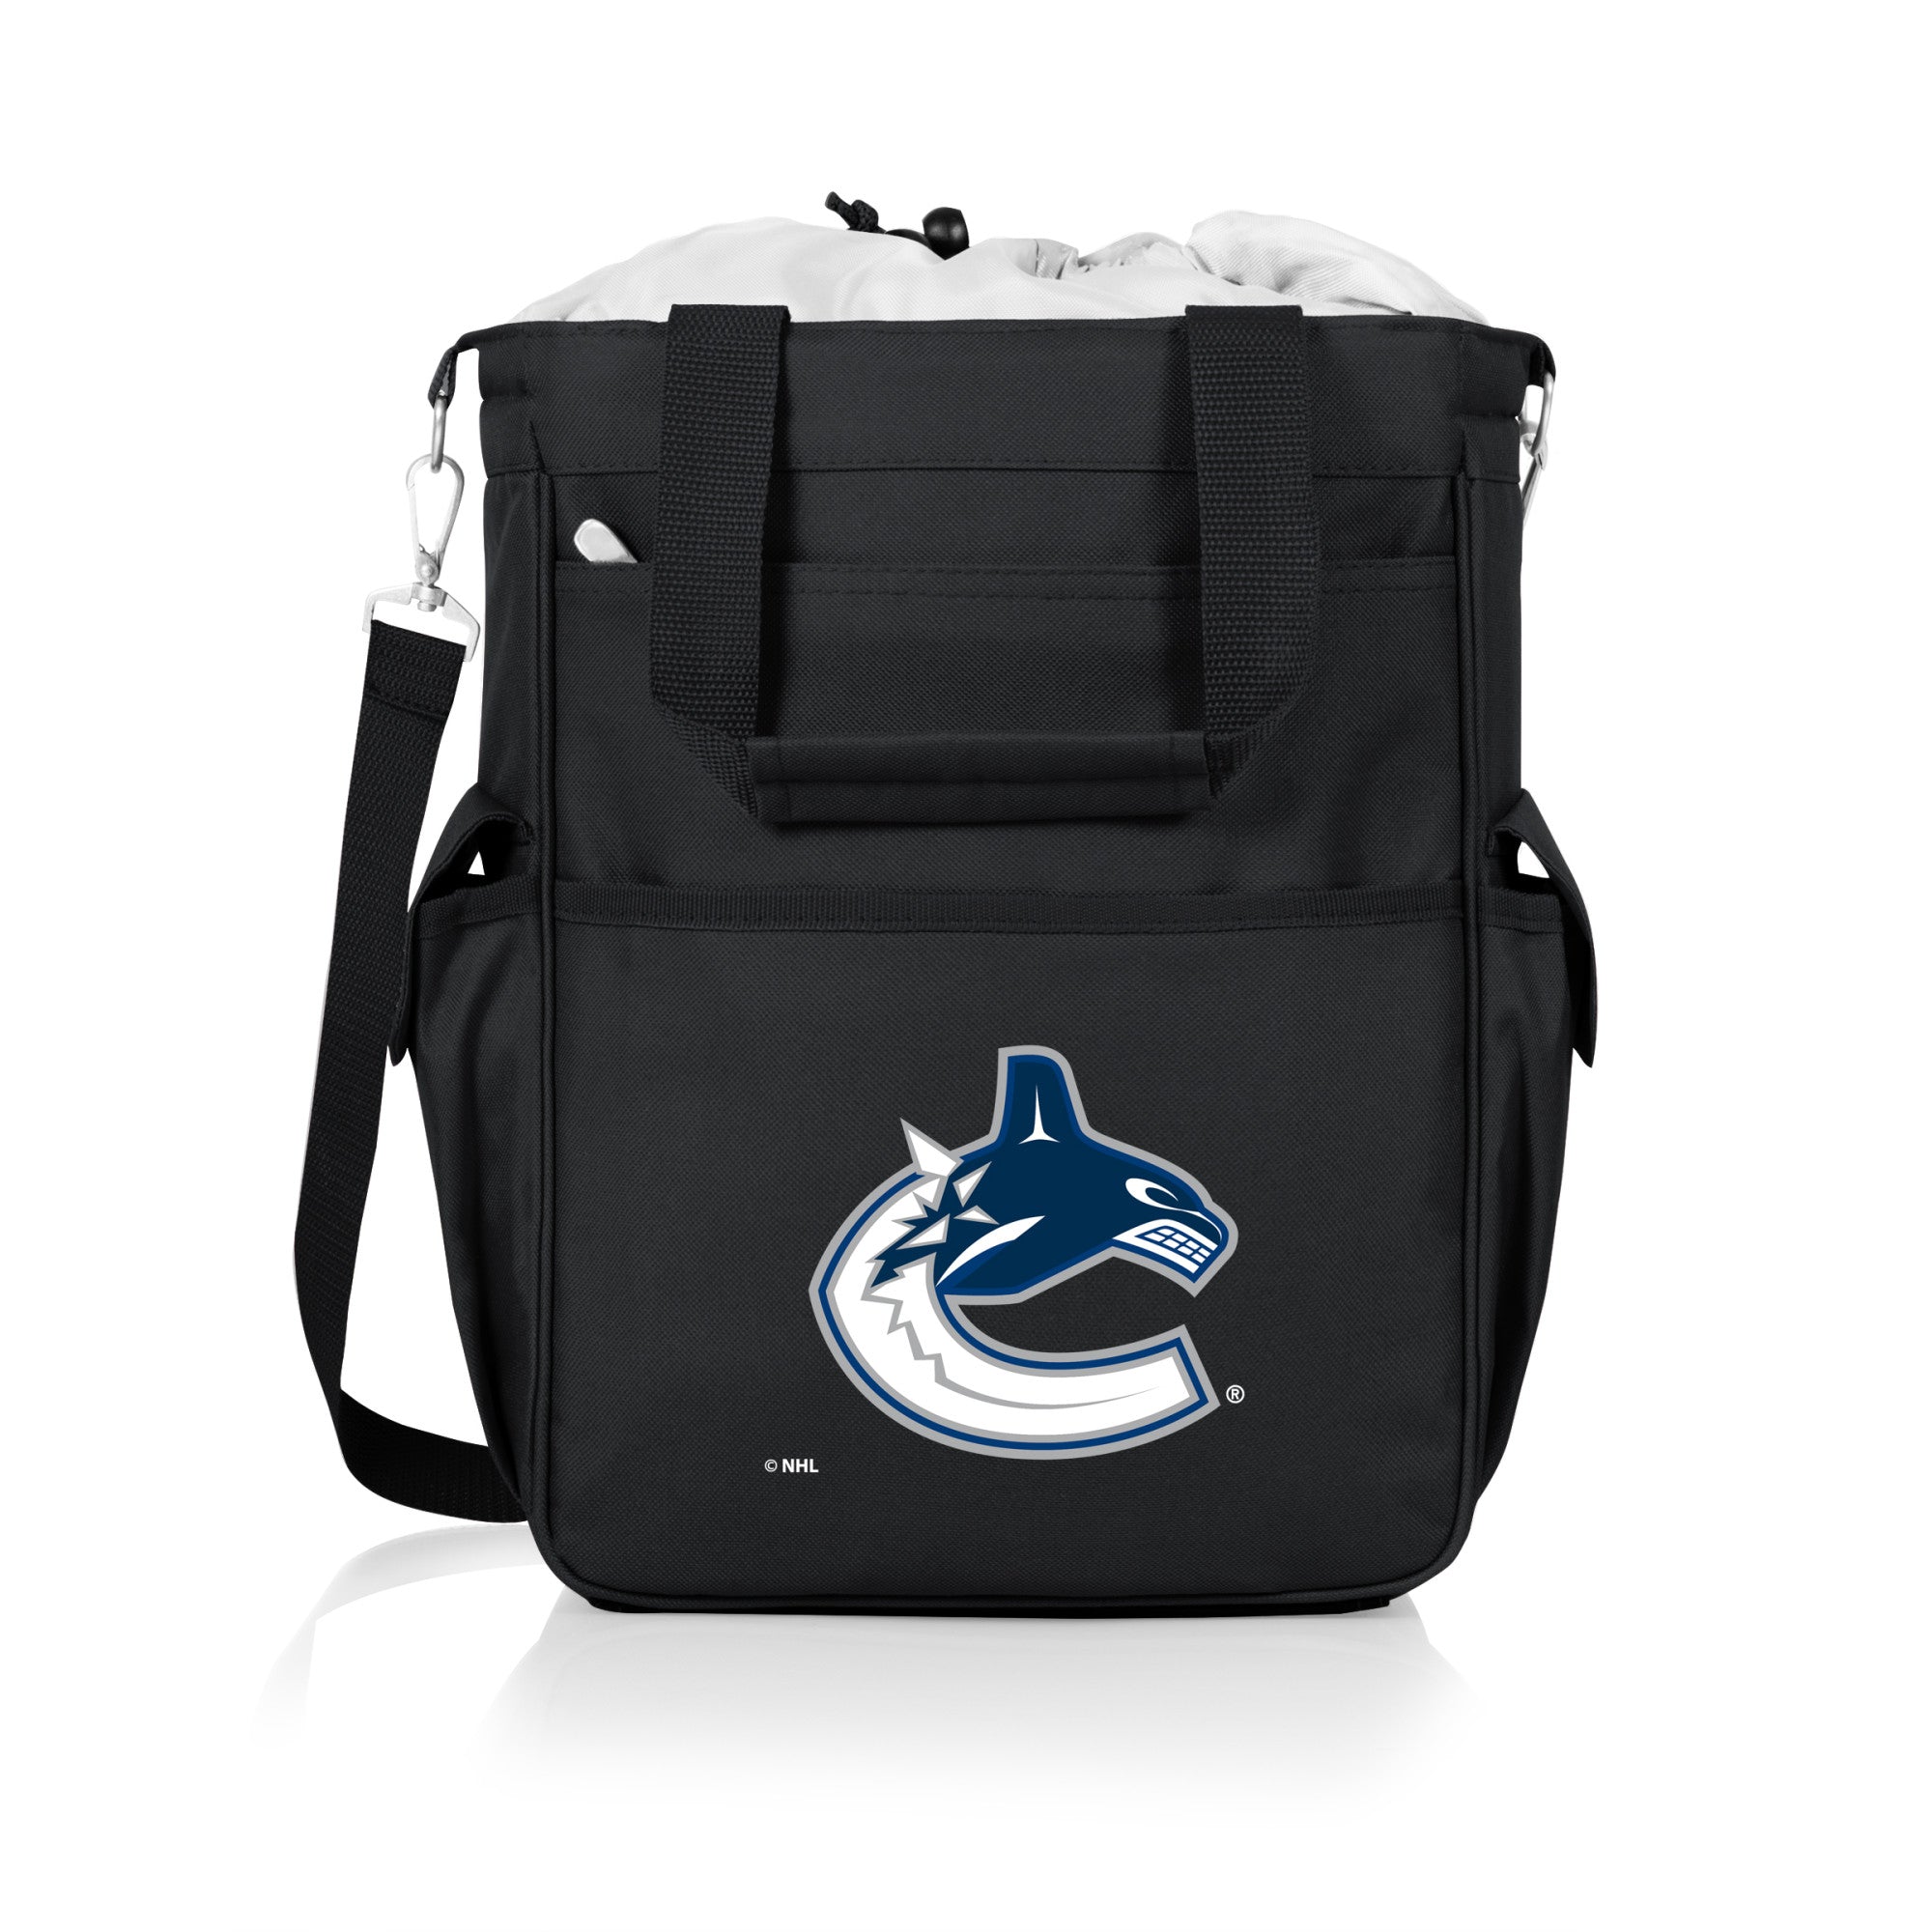 Vancouver Canucks - Activo Cooler Tote Bag